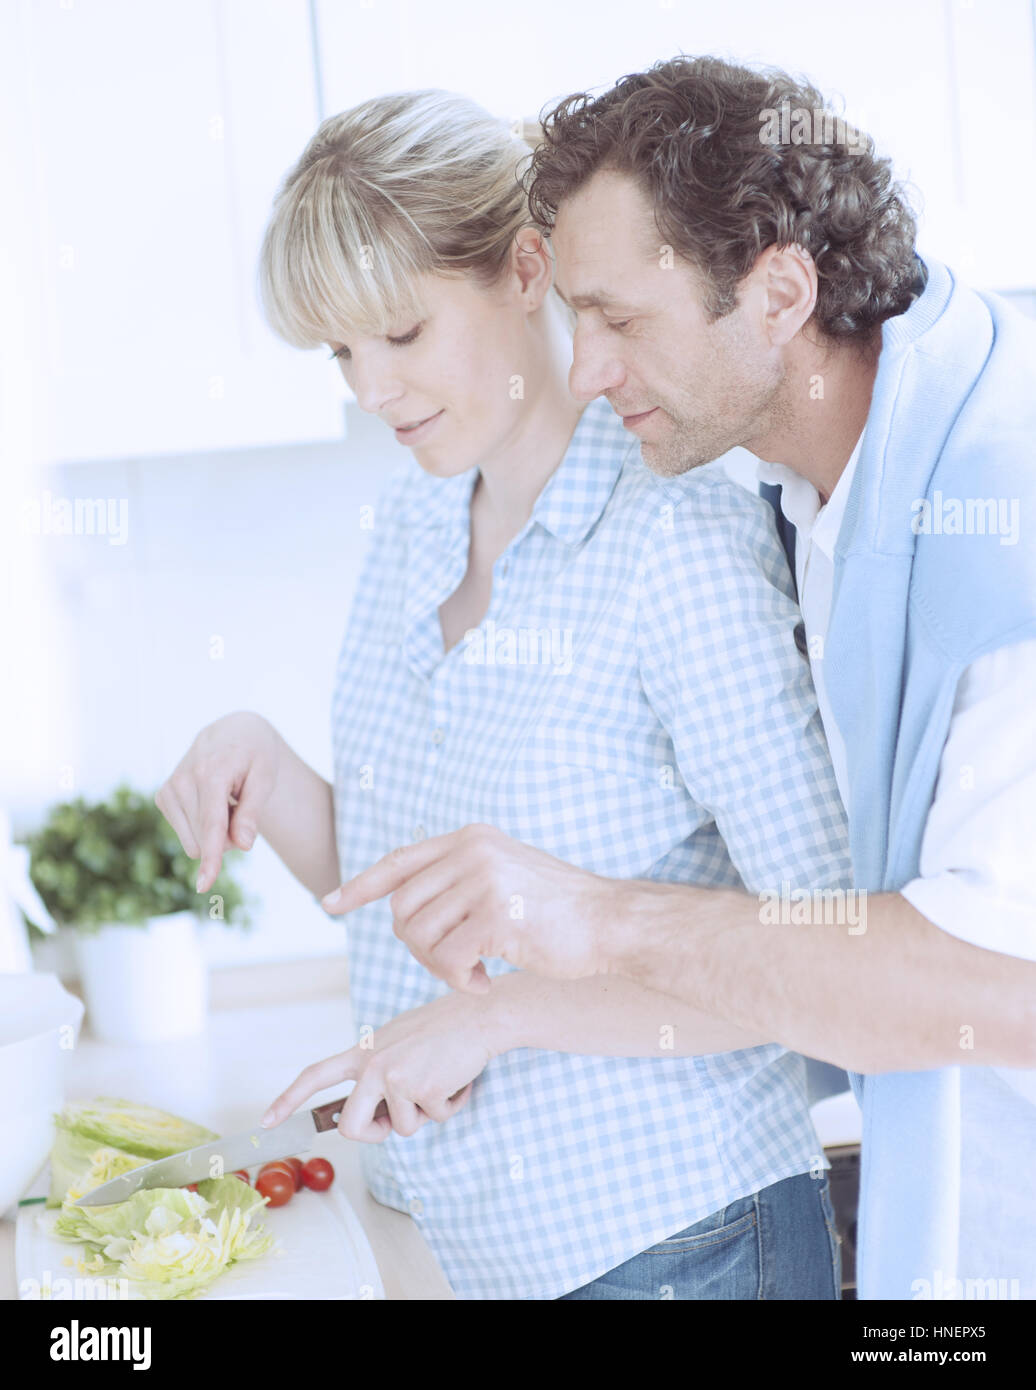 A couple making a healthy salad in the kitchen Stock Photo